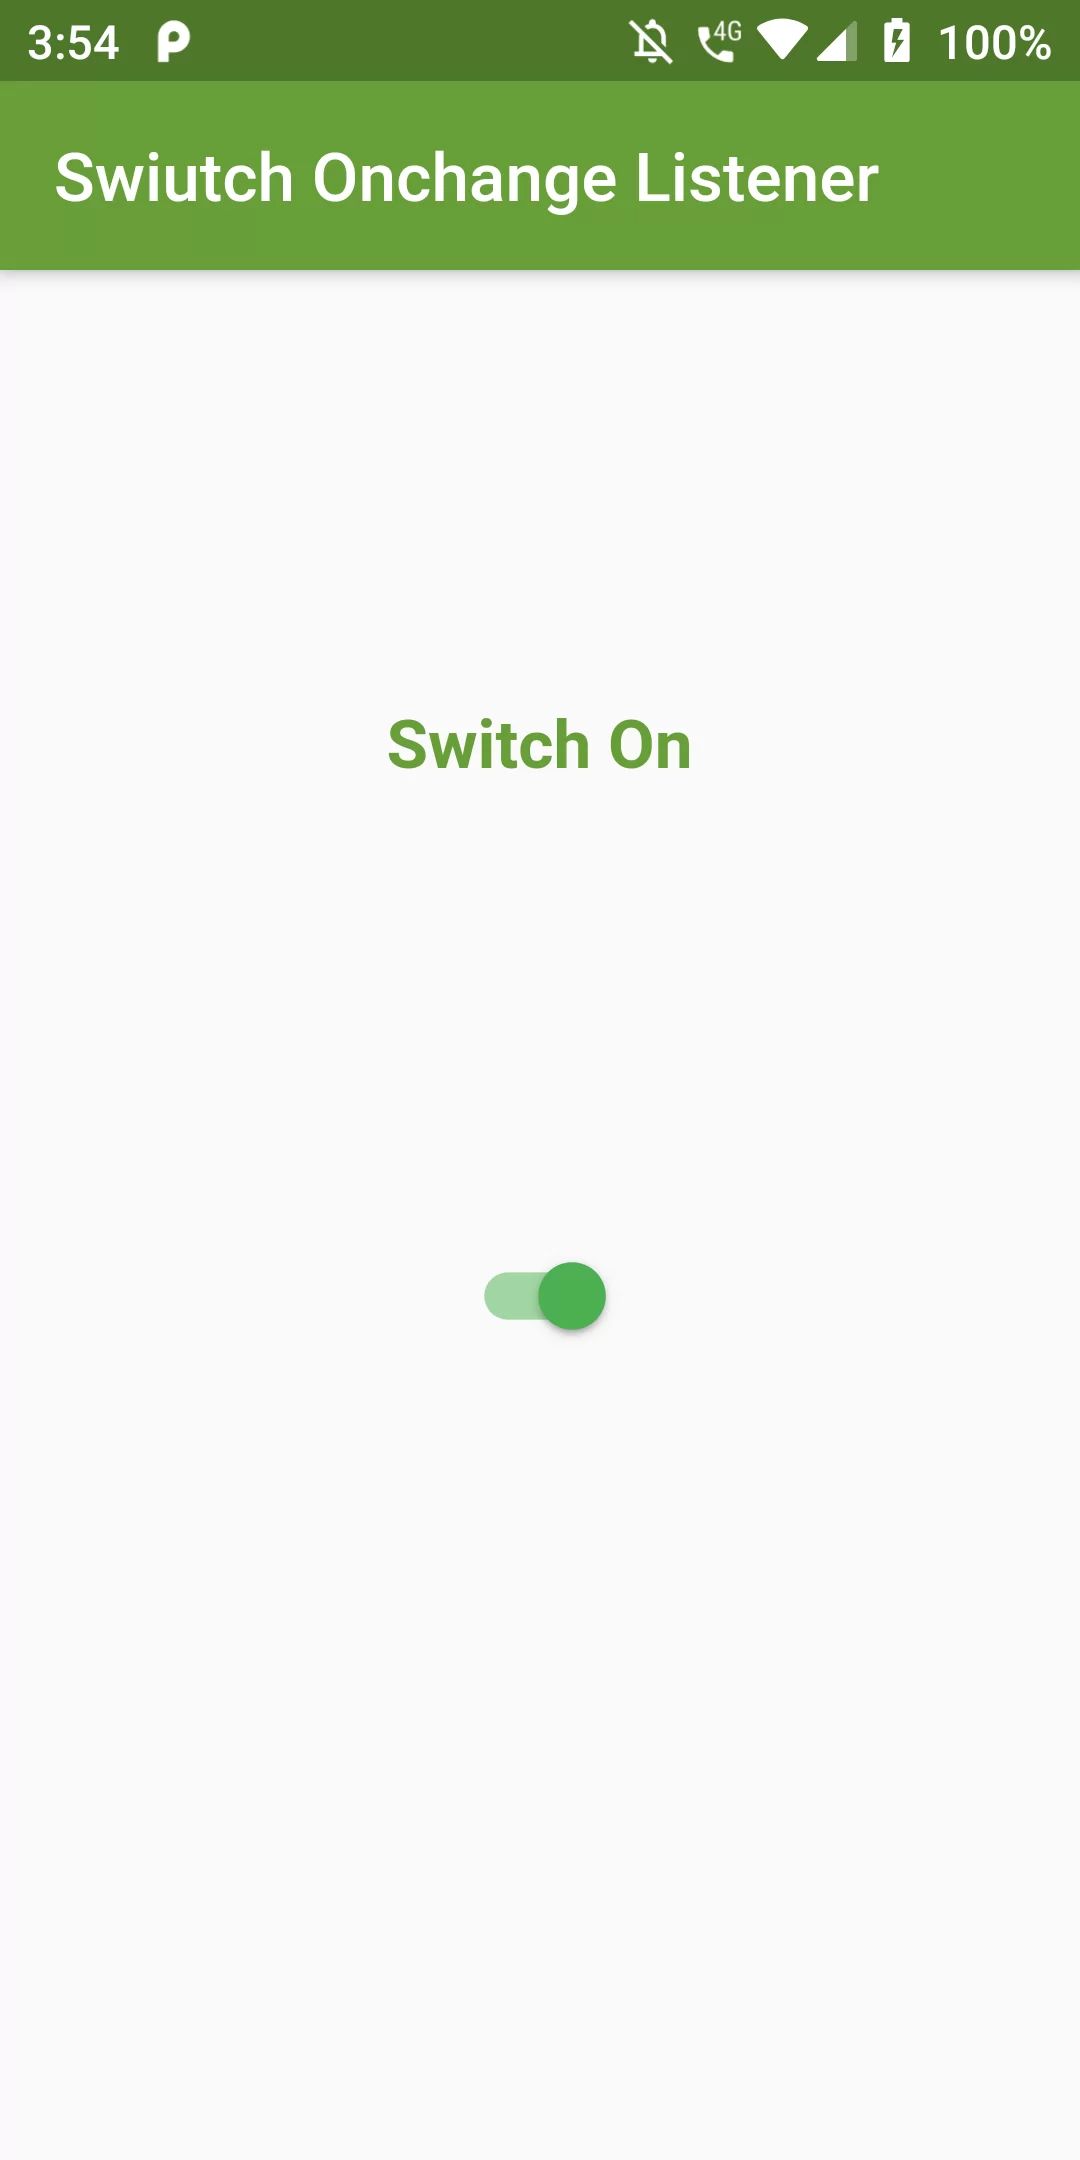 How To Set Onchange Listener To Switch Using Flutter App